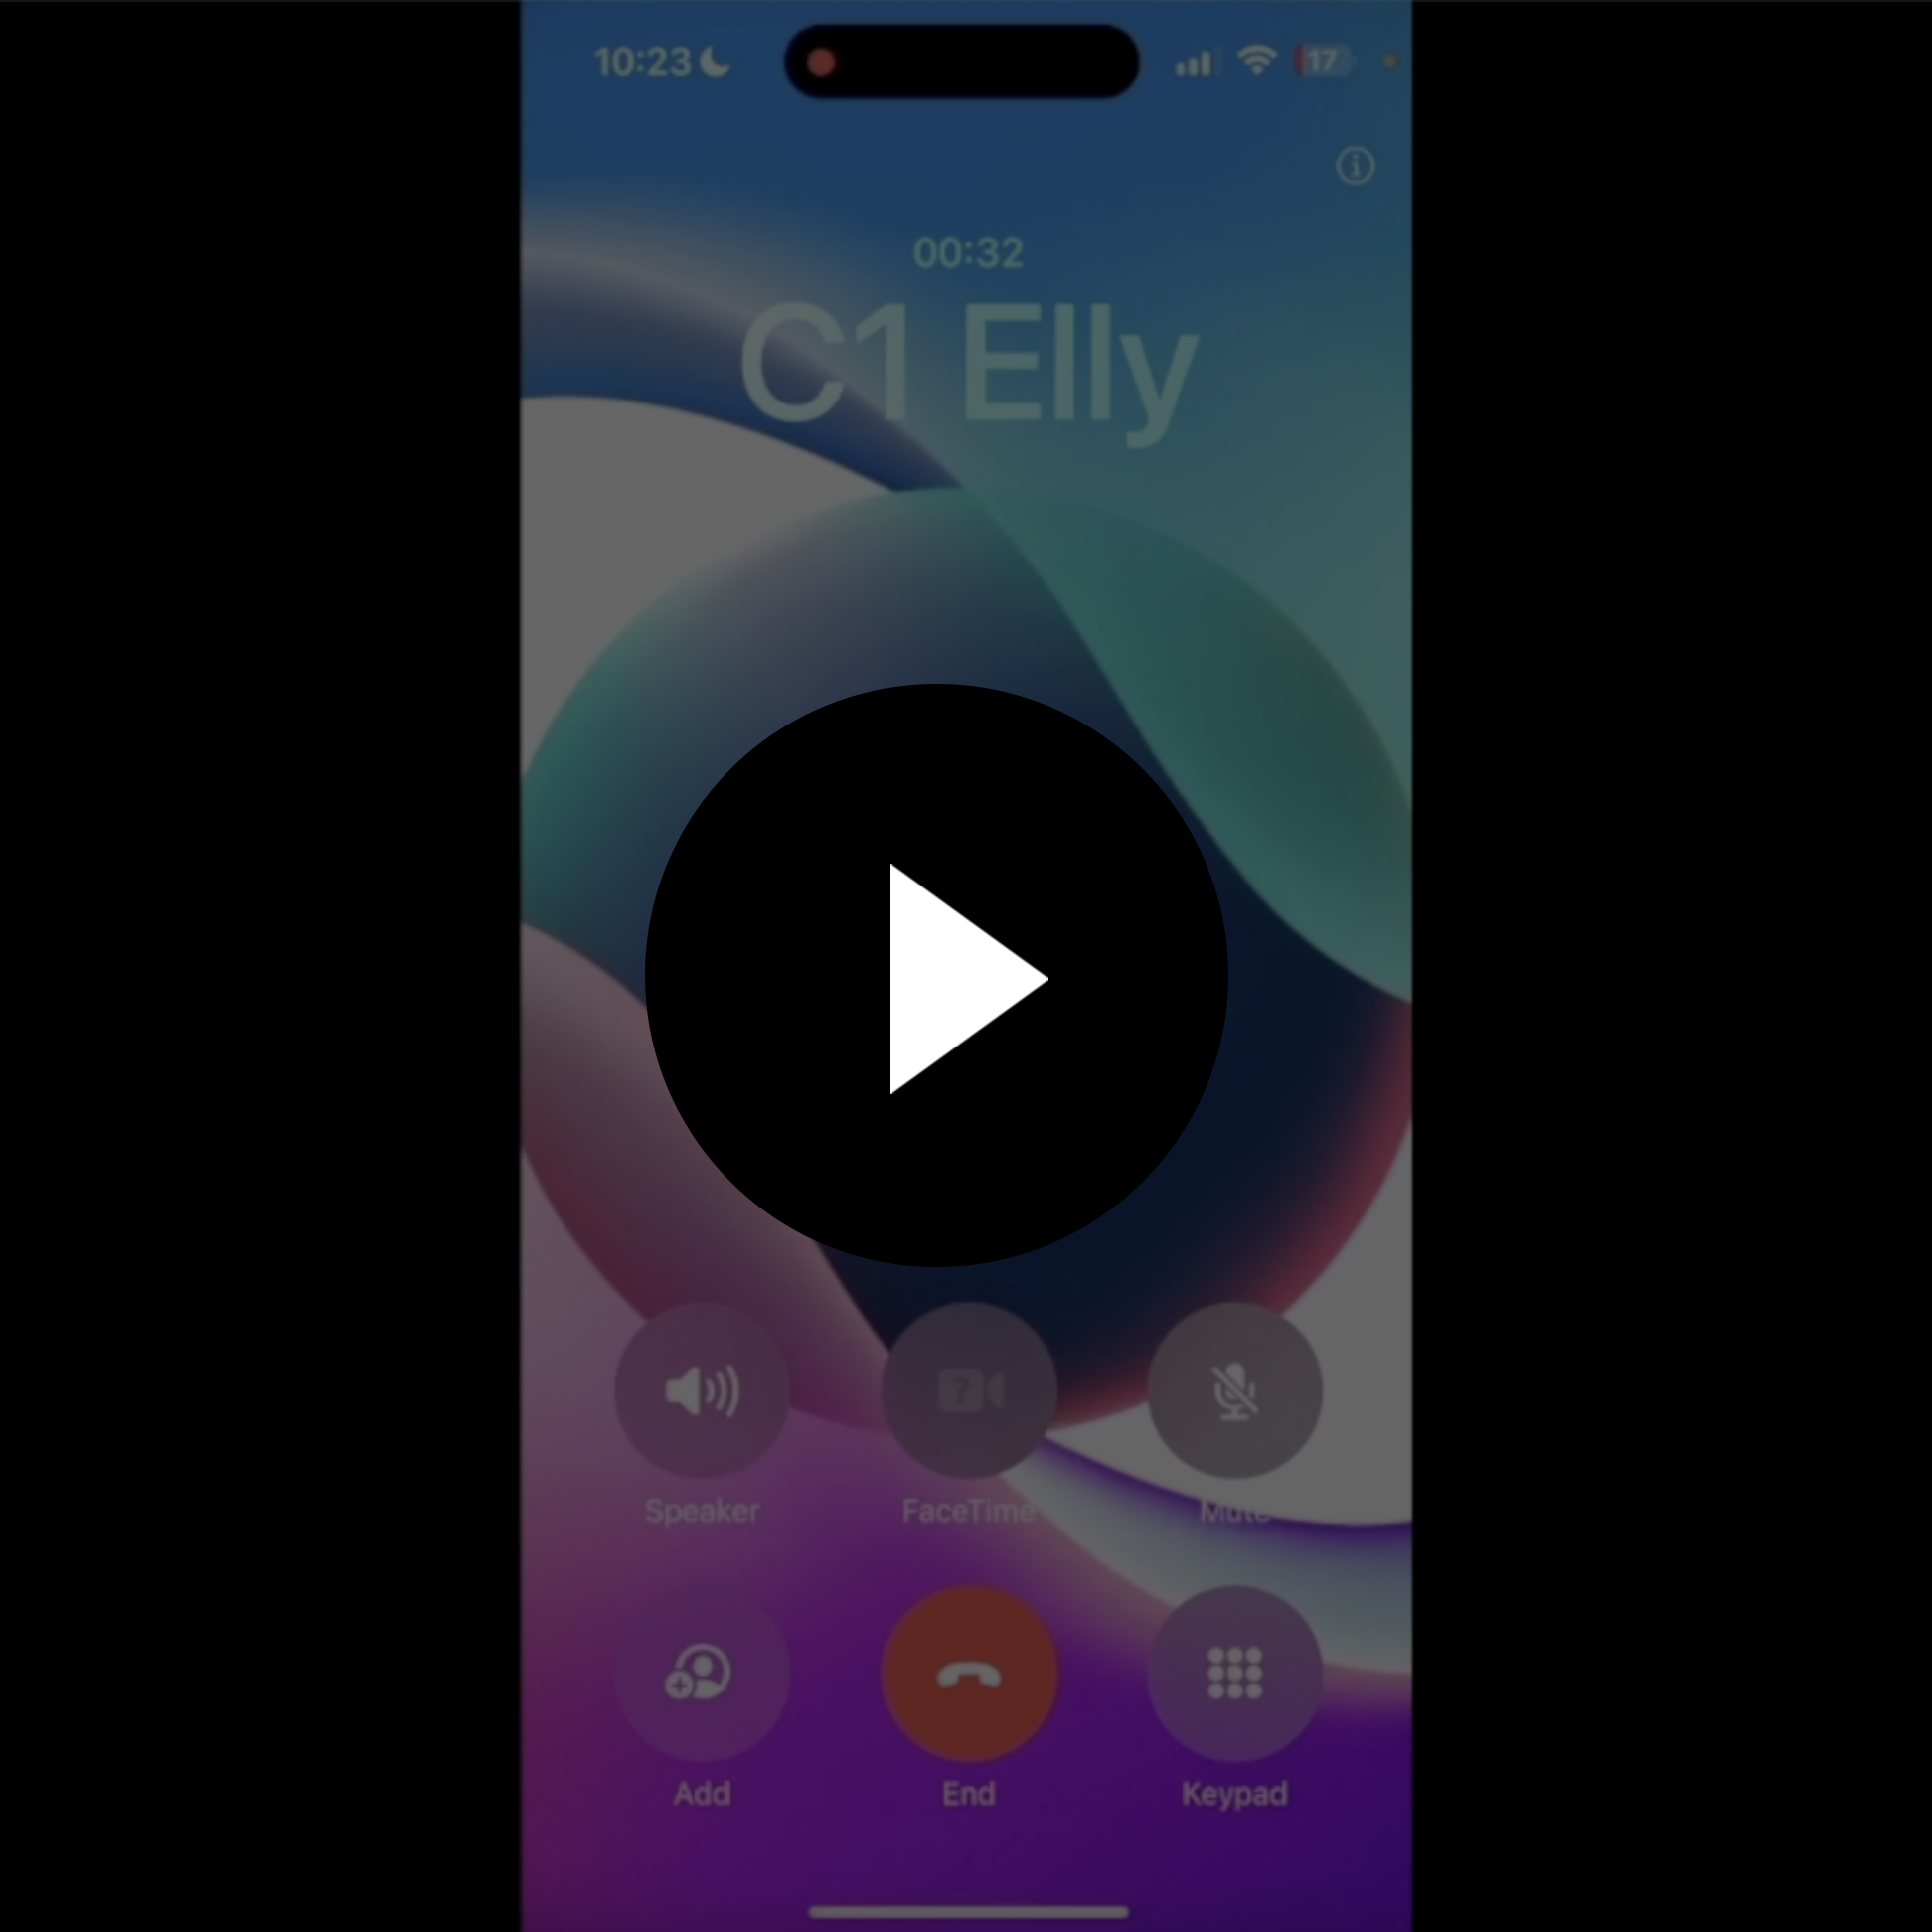 Watch C1 Elly Automate Demo